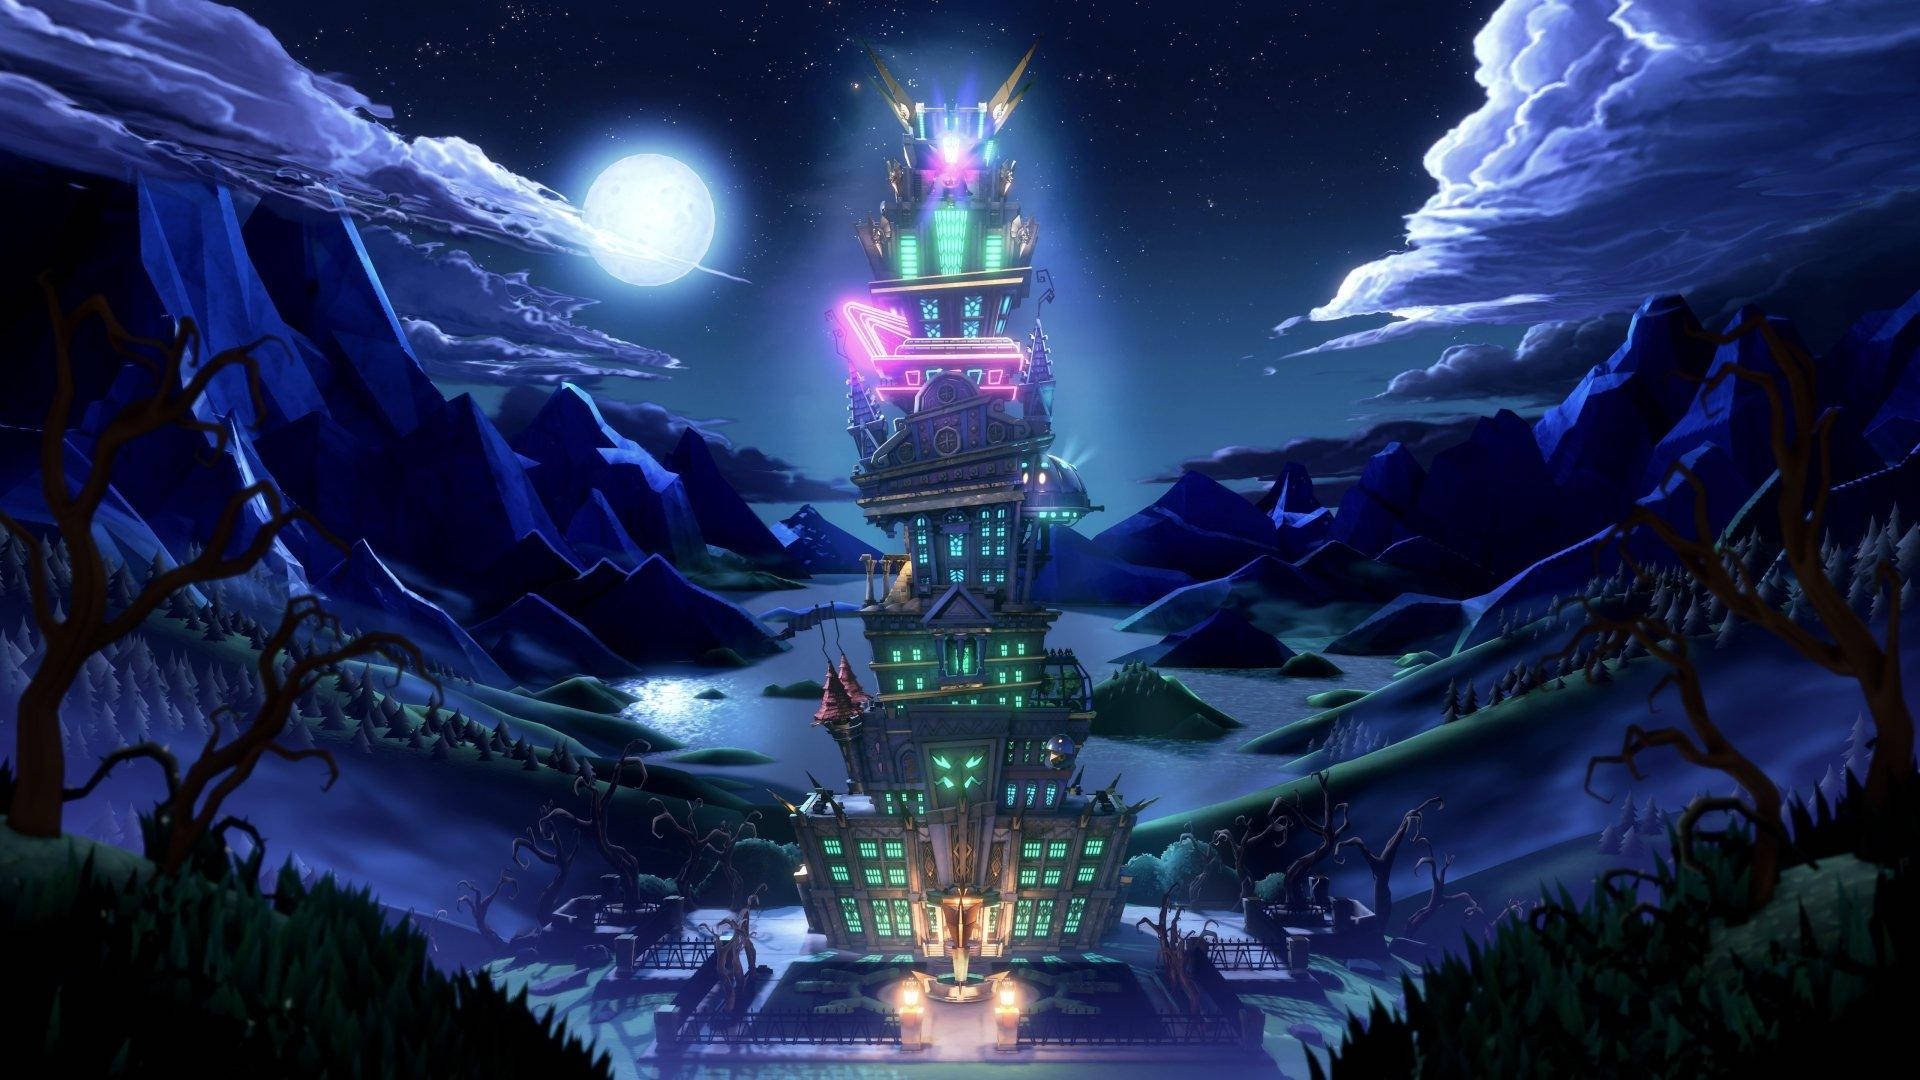 Luigi's Mansion 3 Tall Mansion In The Mountains